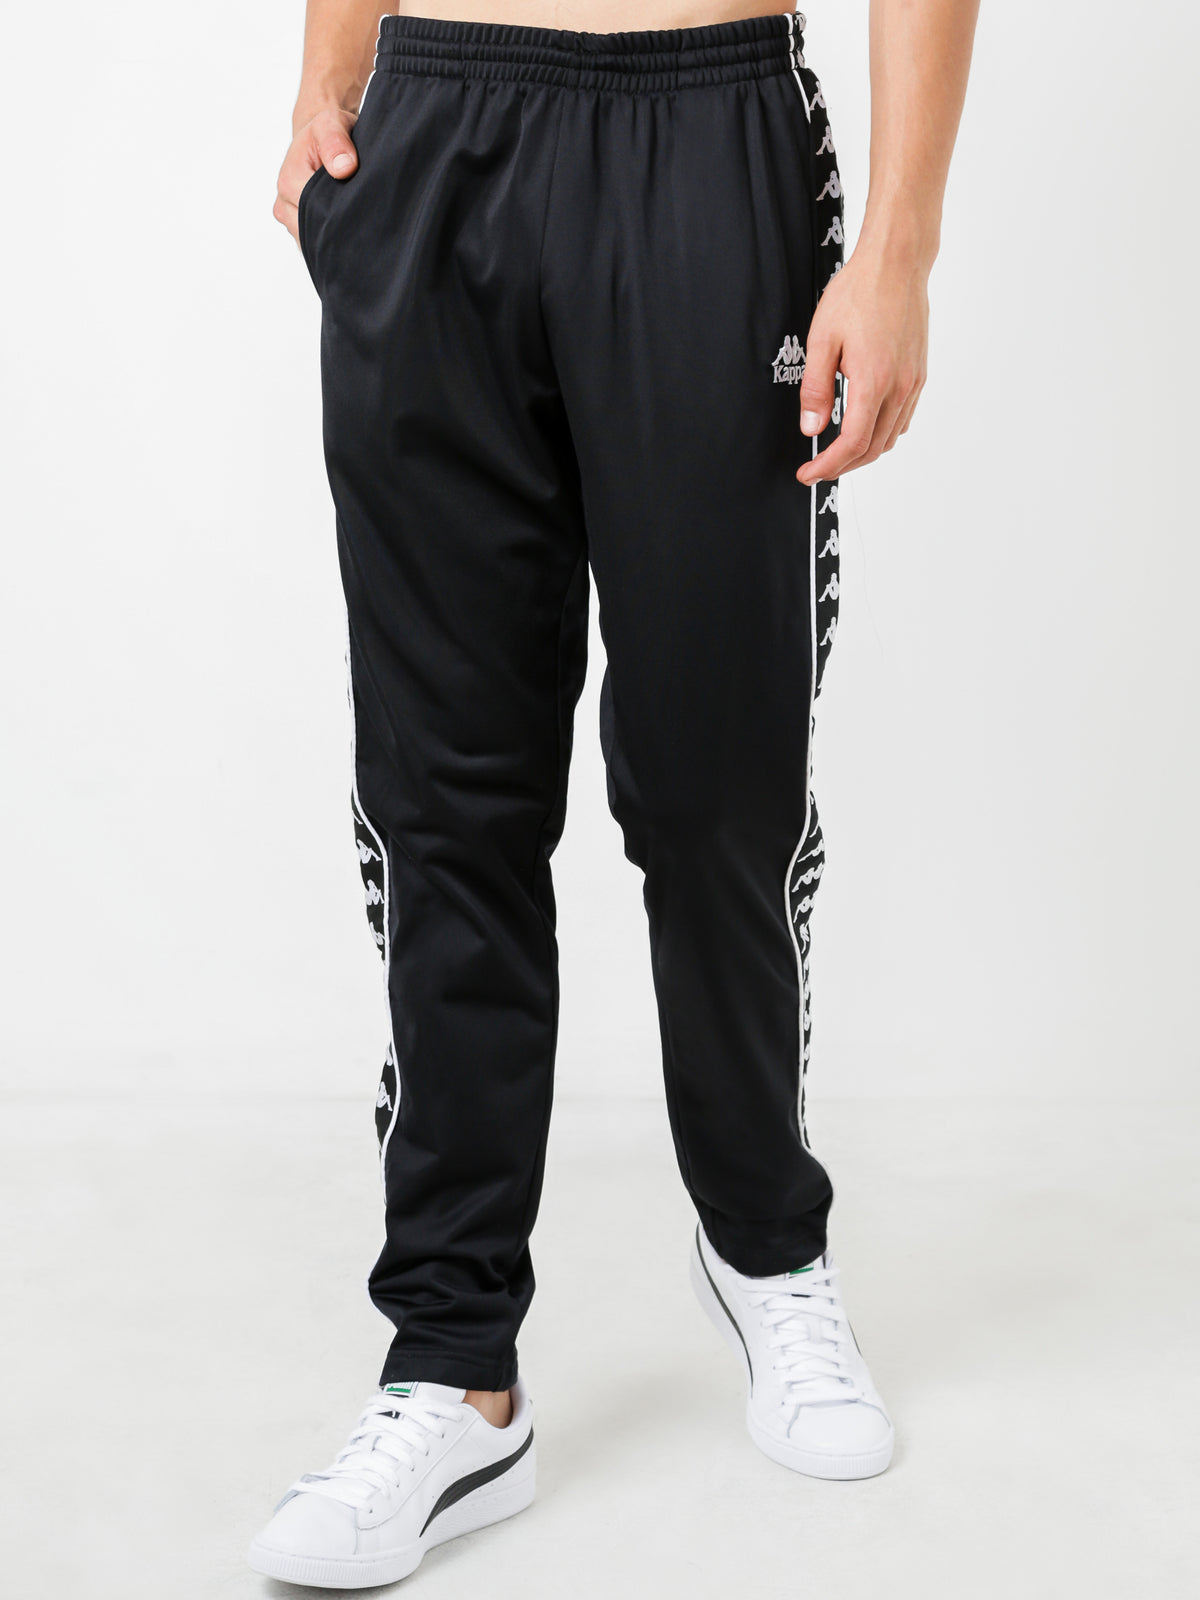 Authentic Hector Snap Pants in Black